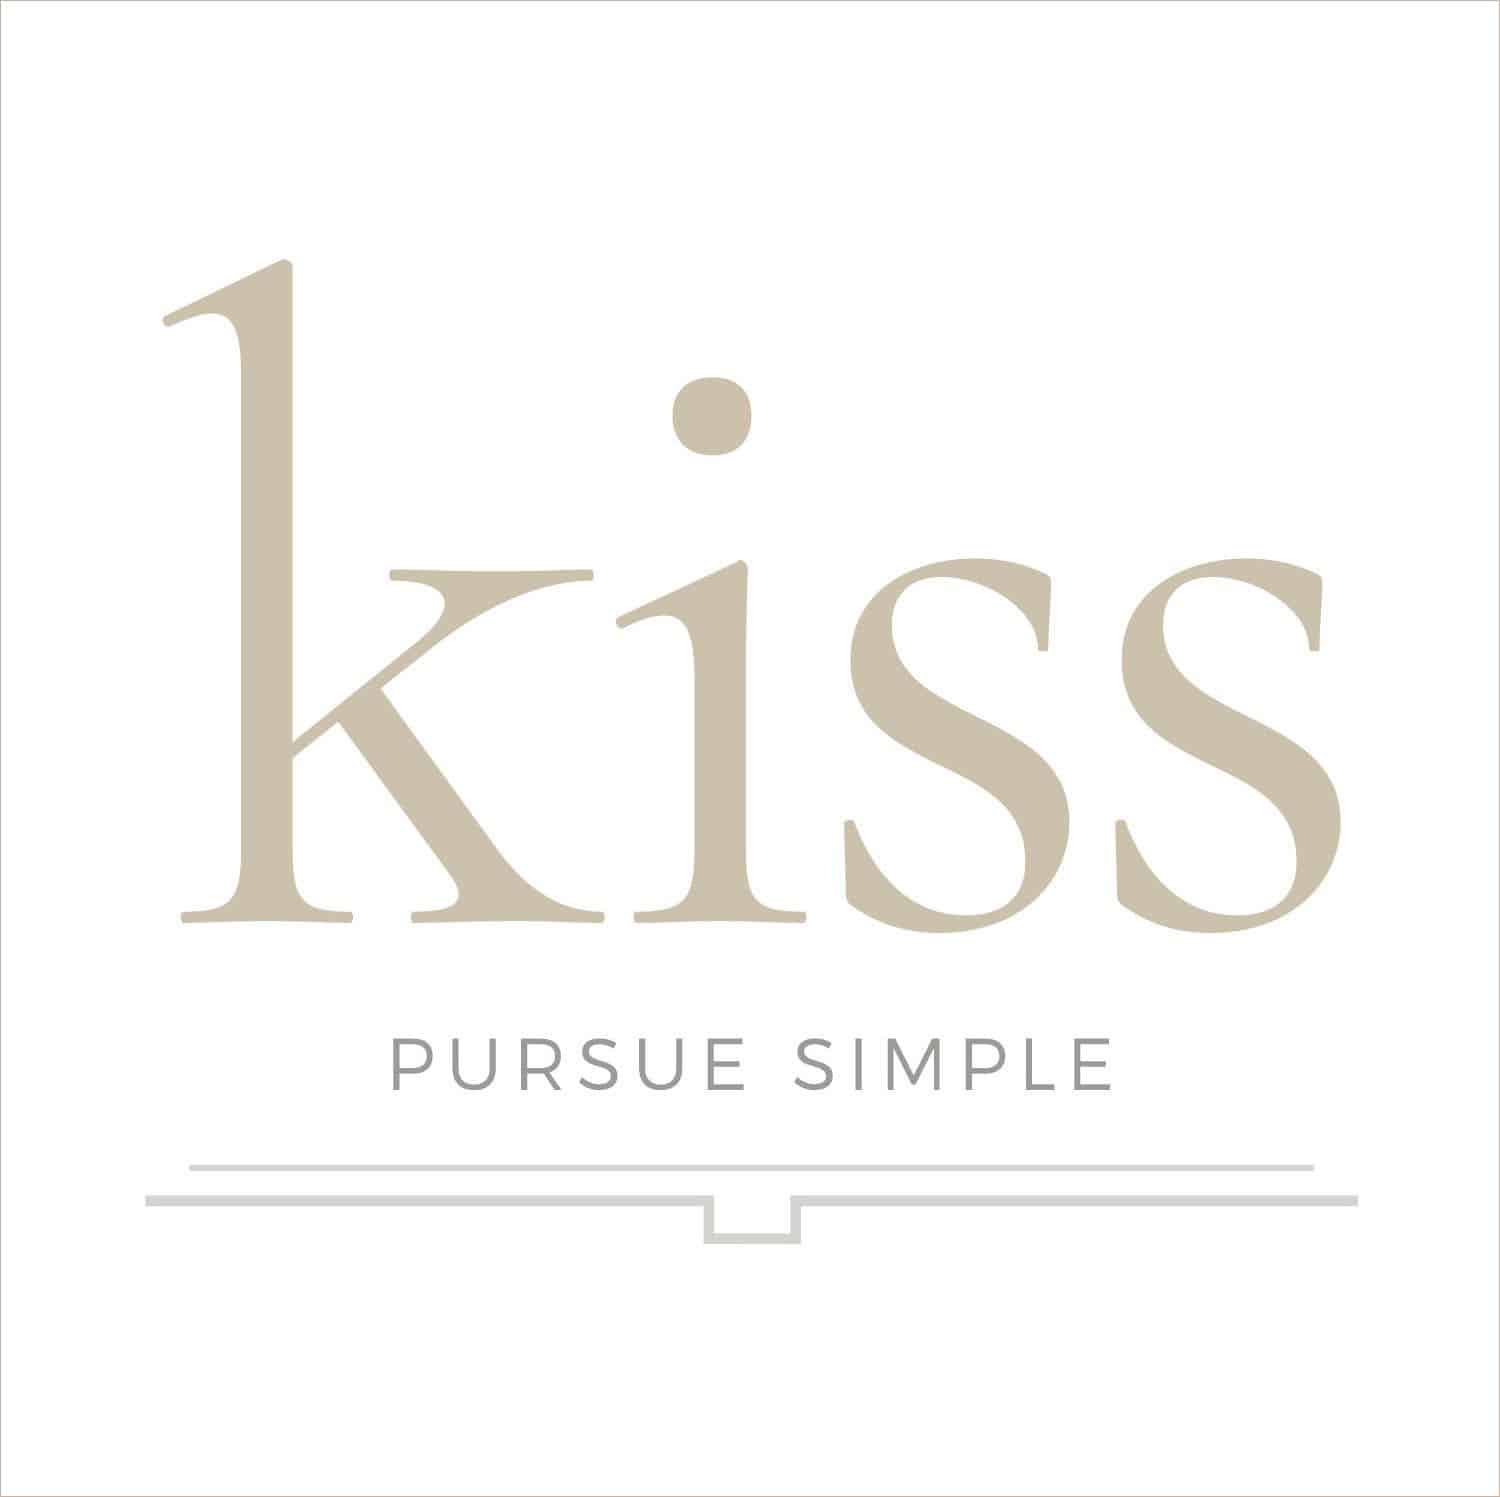 You Think You Want A Logo. What You Need Is A Legacy. The New Kiss Books Logo